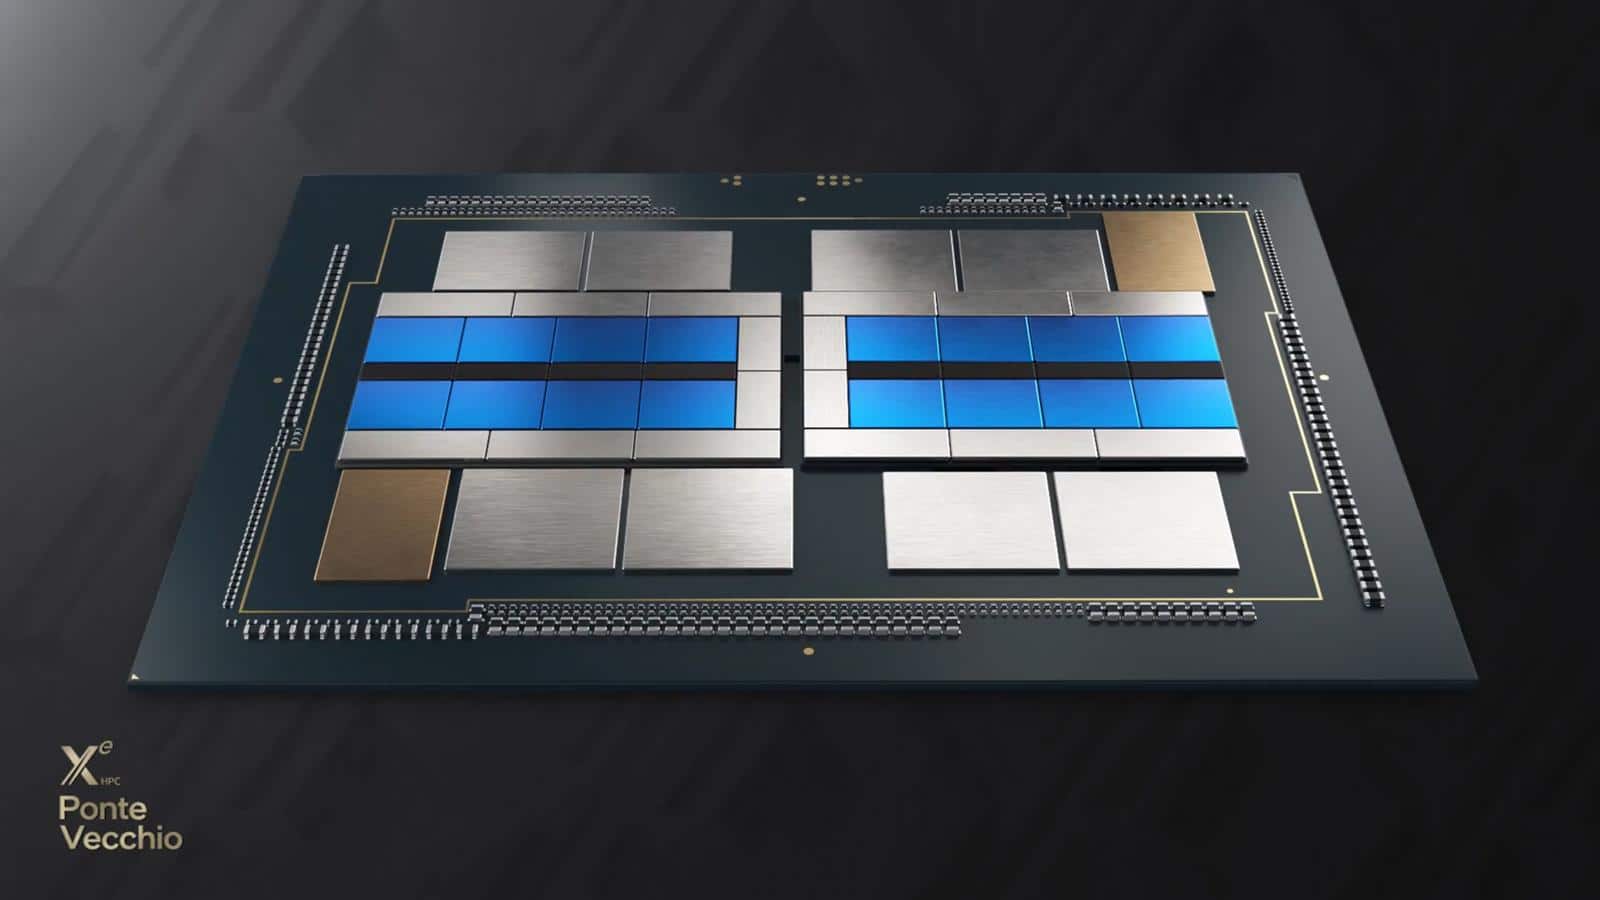 Soon Intel will agree with TSMC on the 3nm process